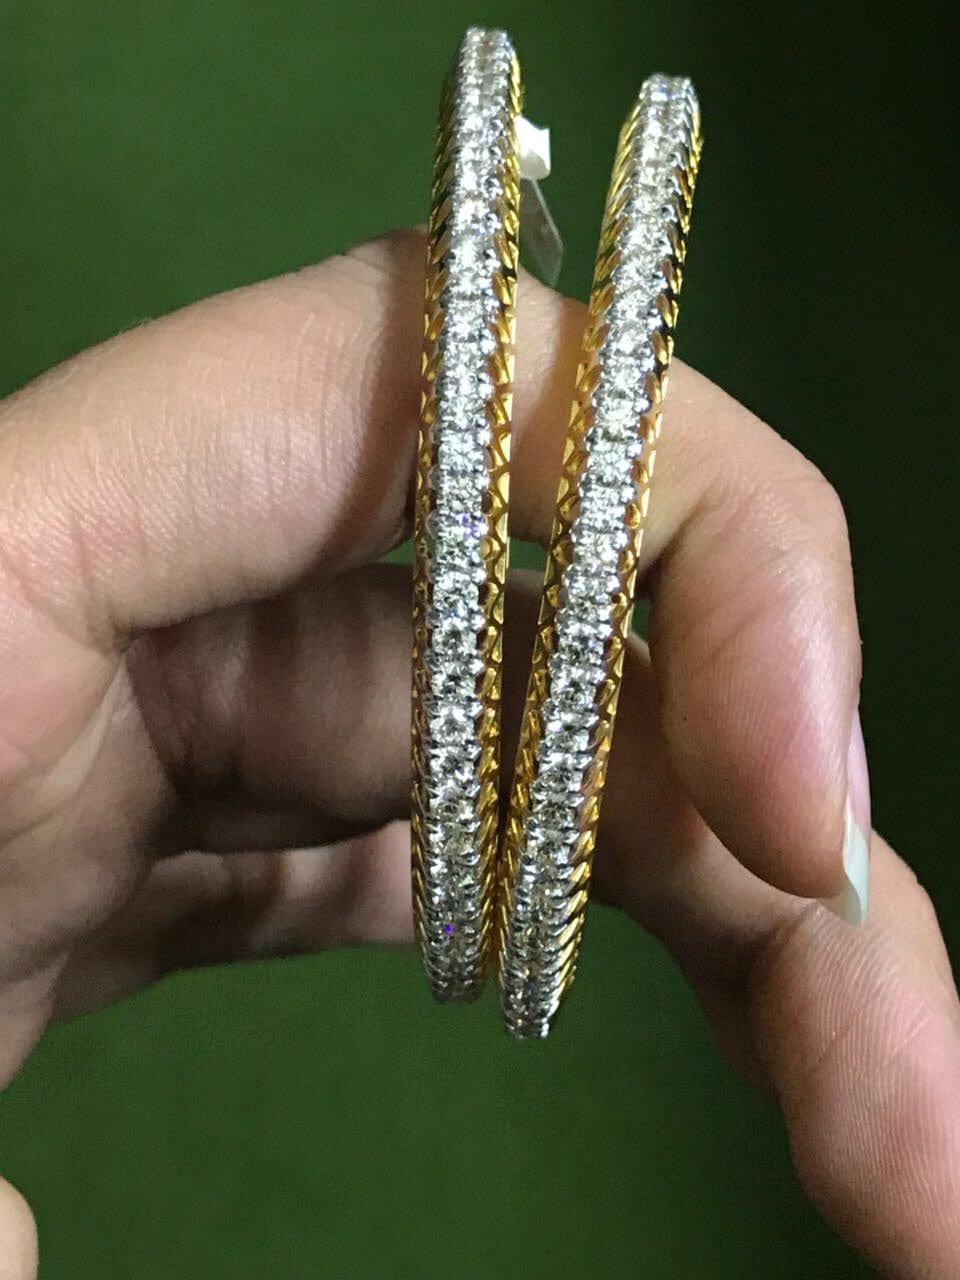 Modern Diamond Bangle Designs in offer Price at Candere by Kalyan Jewellers